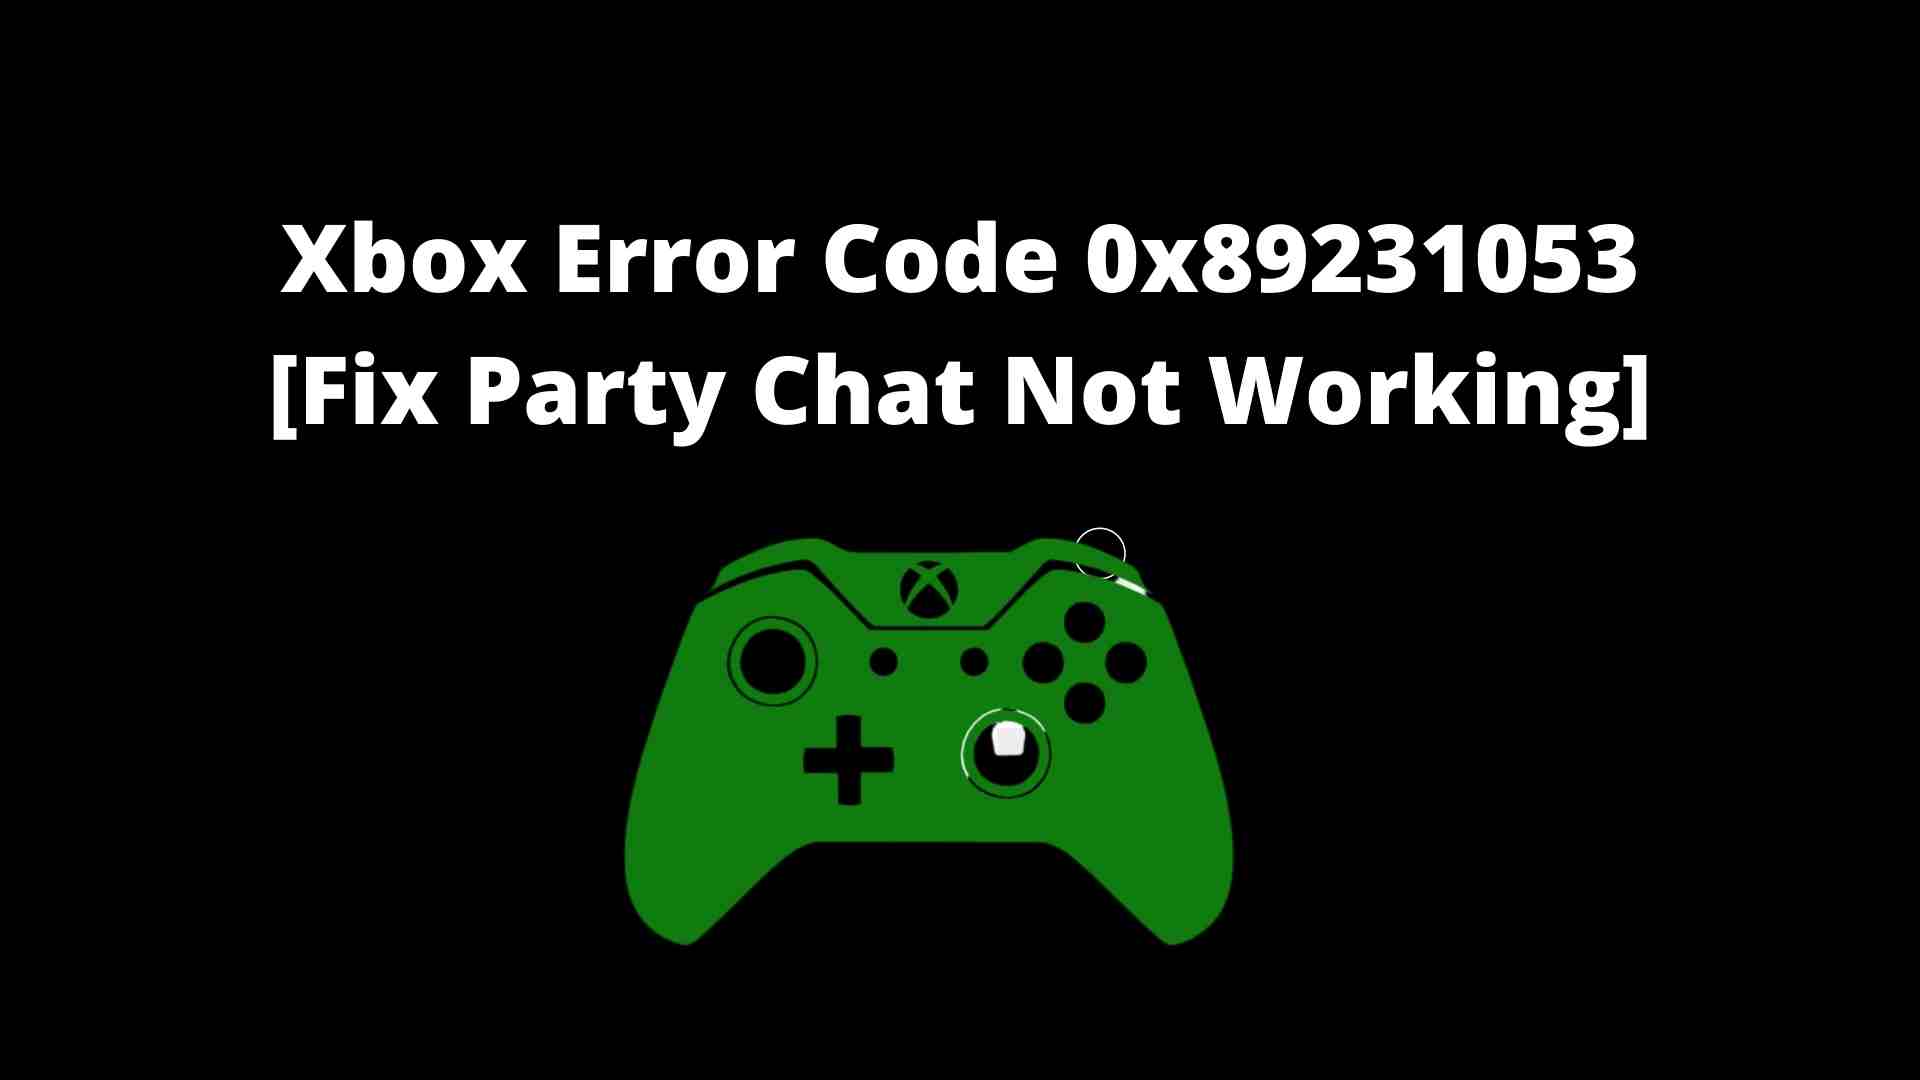 Xbox Error Code 0x89231053 Fix Party Chat Not Working